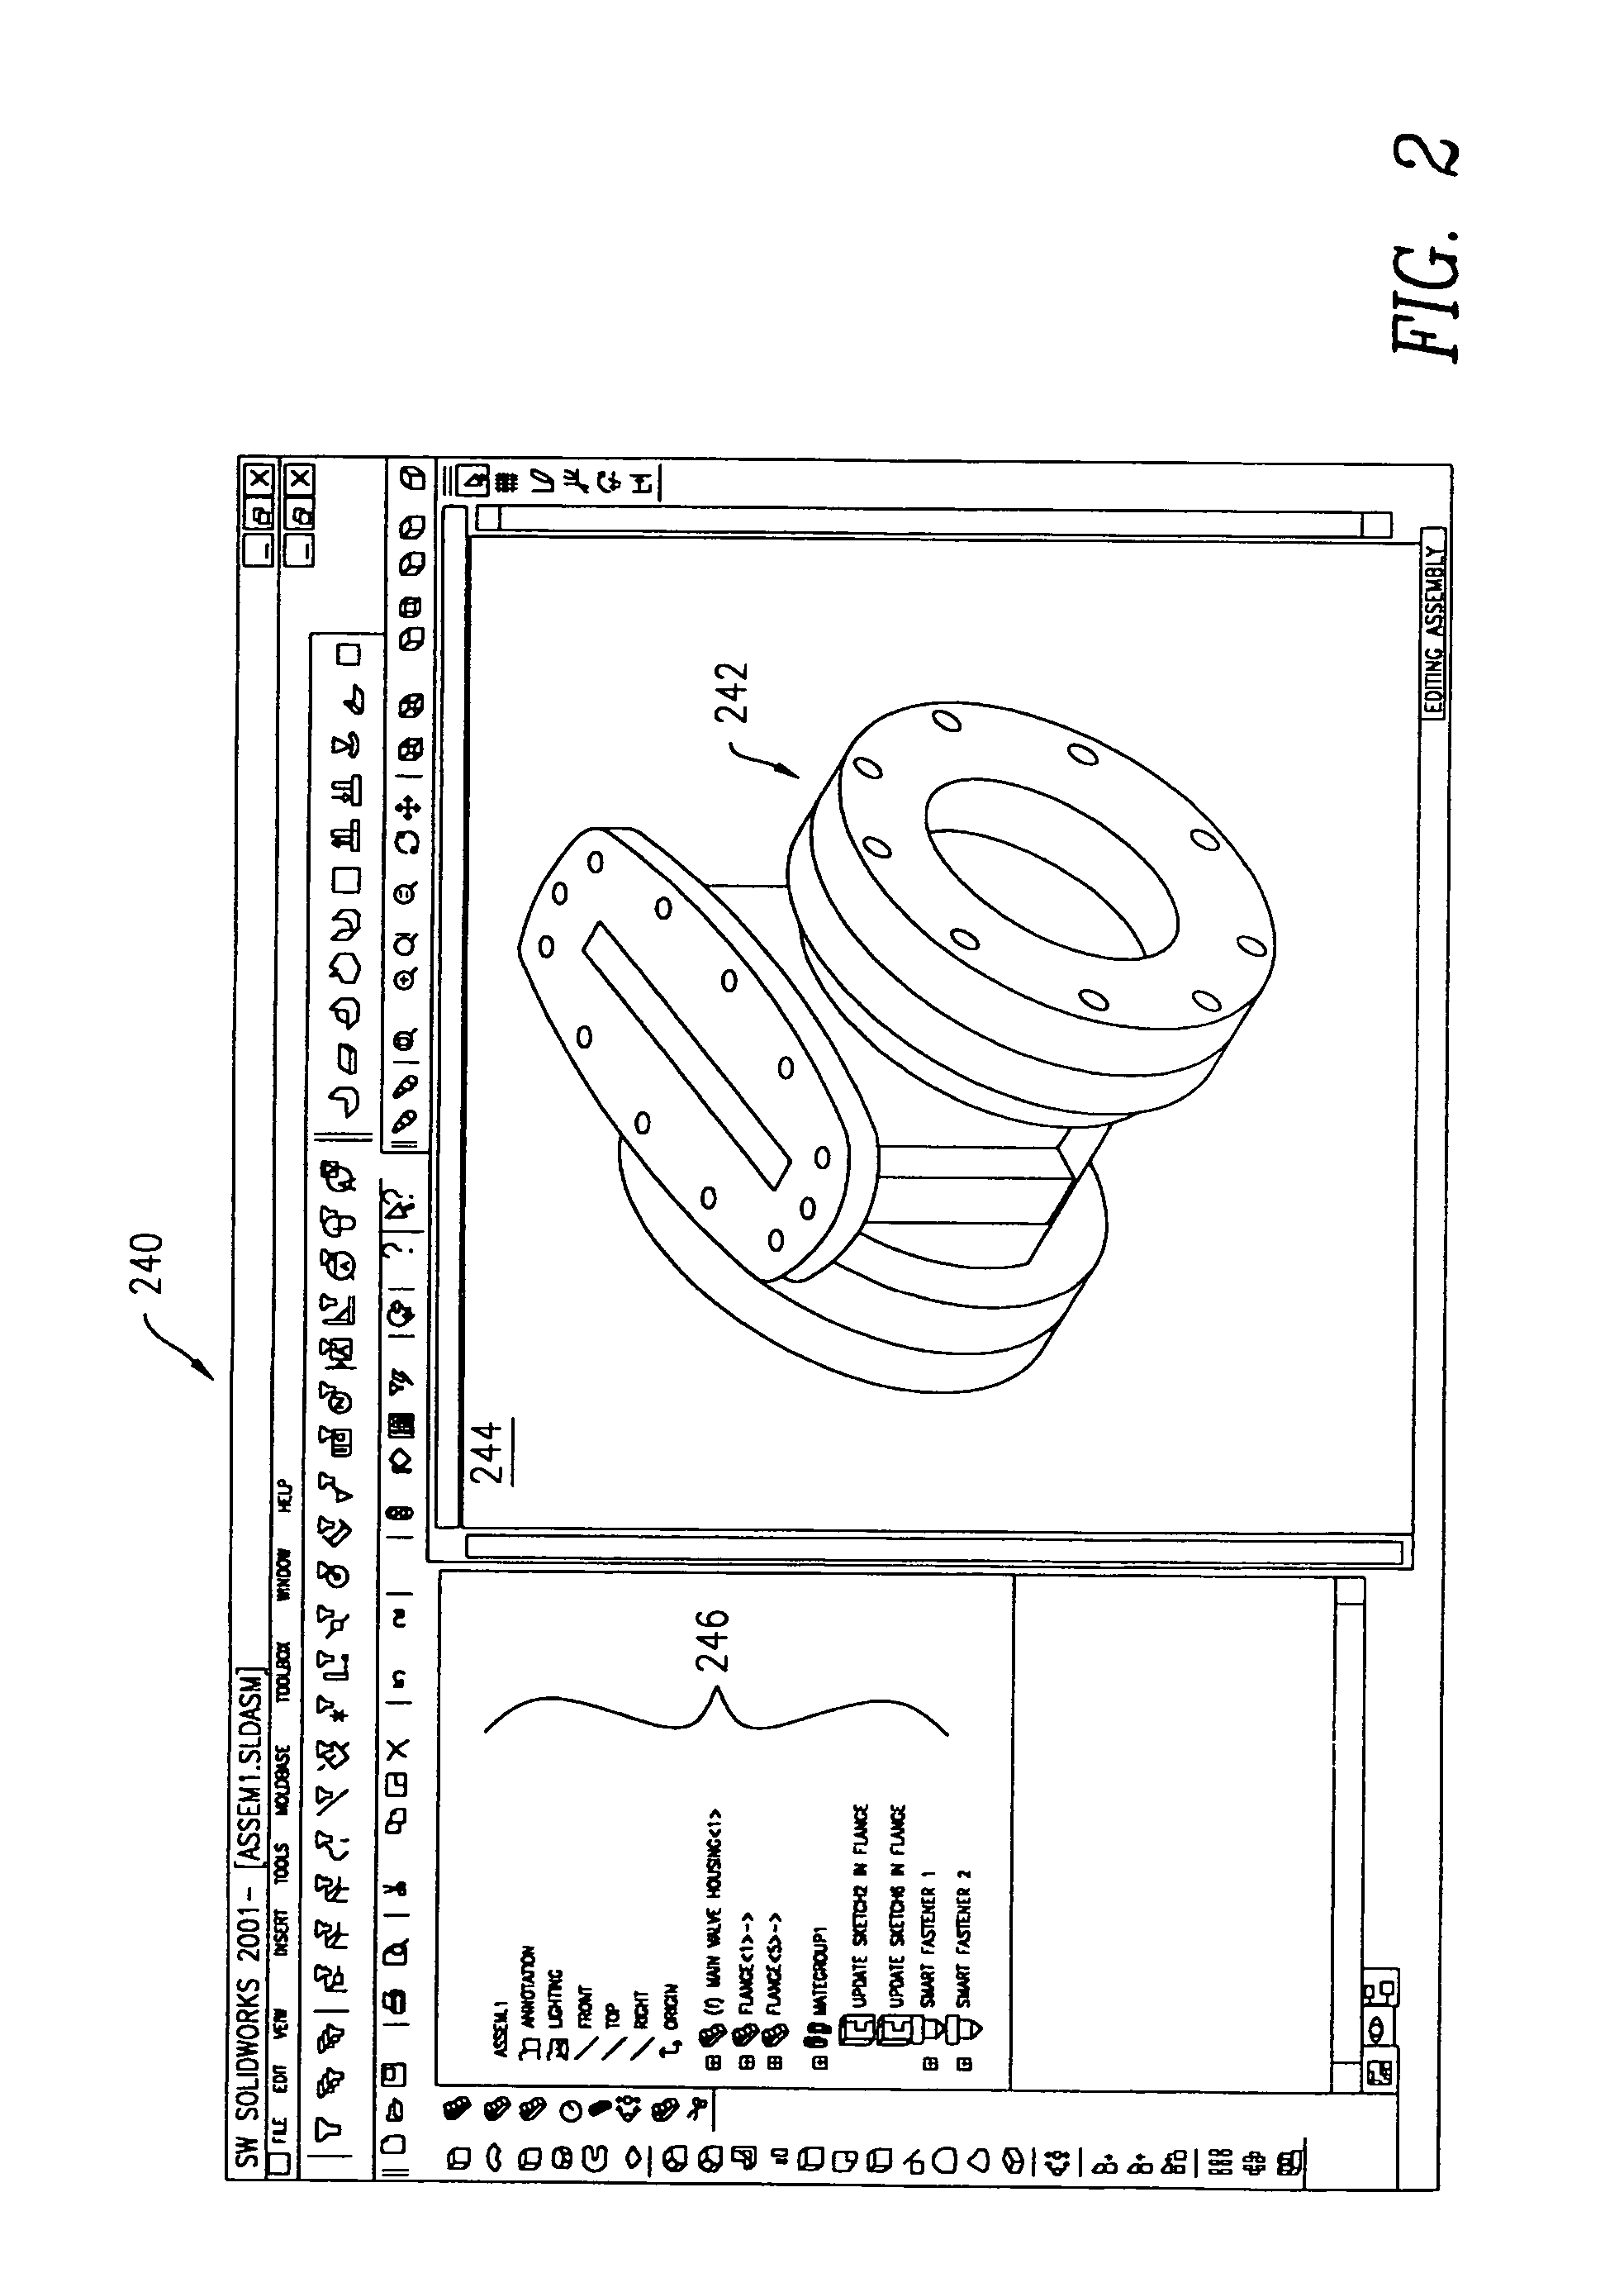 Automated connections of computer-aided design components